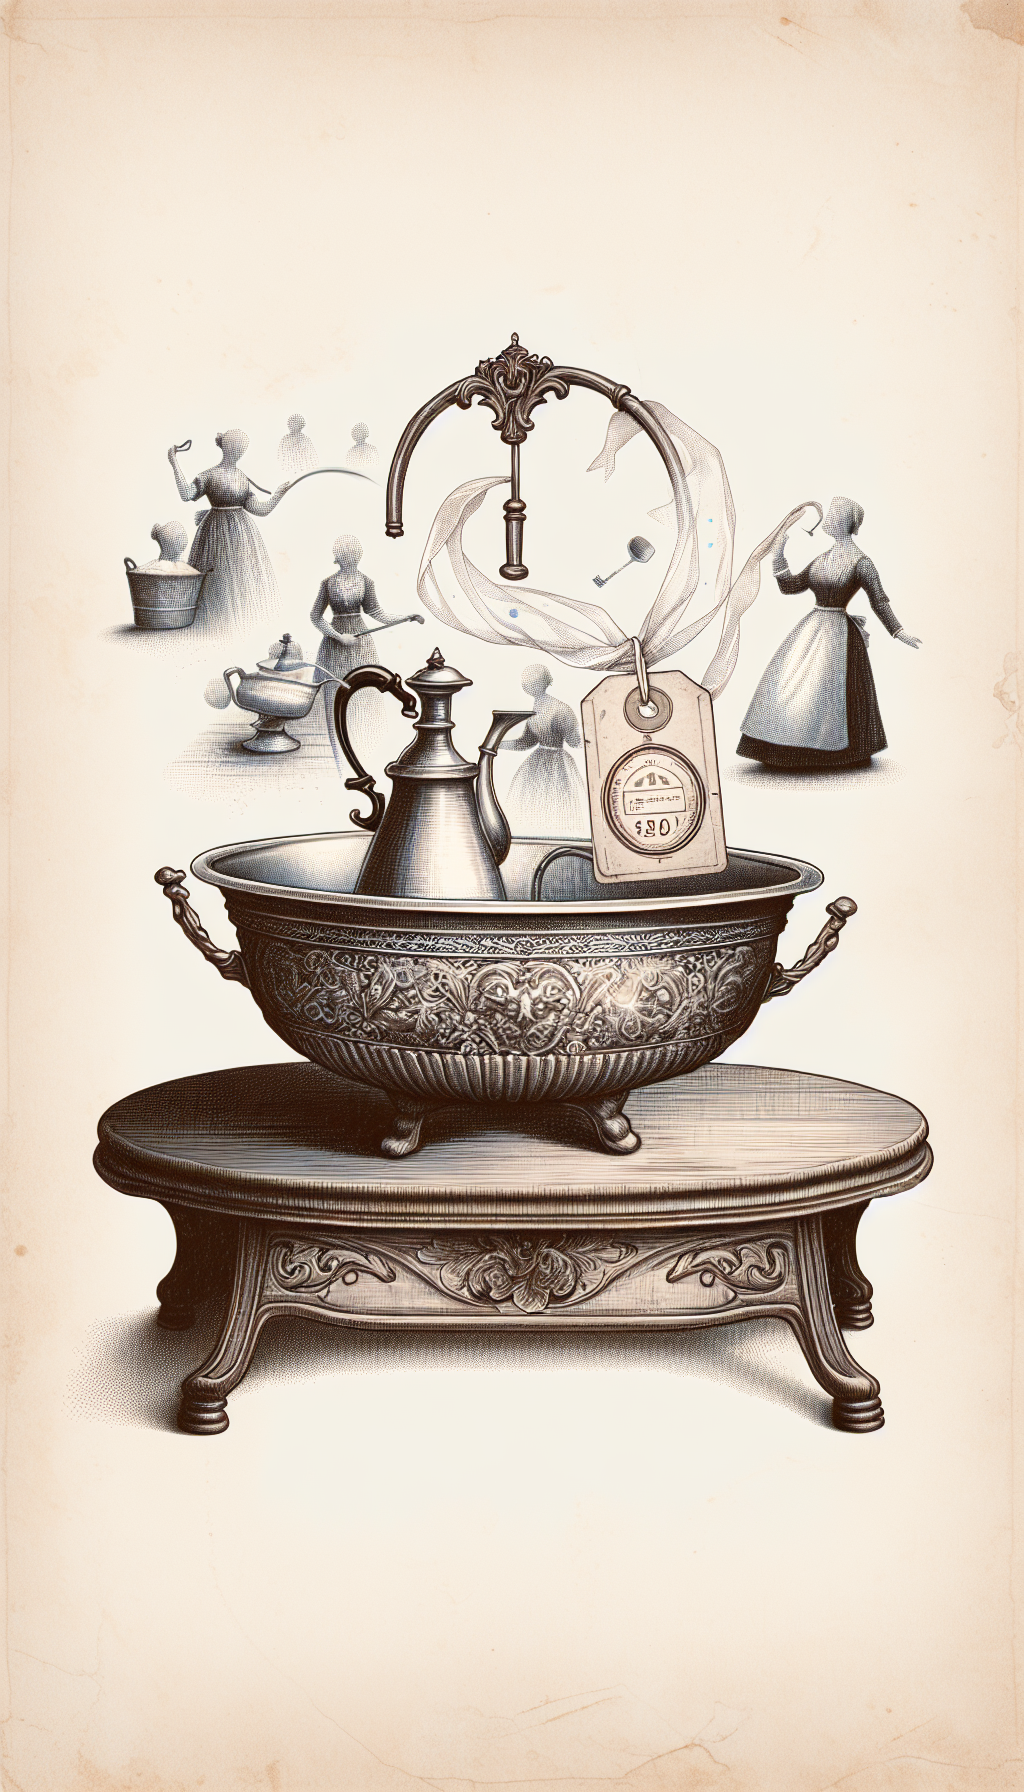 An illustration showcasing an elegant Victorian-era wash basin and pitcher, exquisitely detailed and placed upon an antique wooden stand. Surrounding the setup, ghostly outlines of a bygone era's figures perform morning ablutions. Glowing softly above the pitcher, a price tag dangles from a translucent ribbon, hinting at its high value, blending vintage allure with the modern appeal of collecting antiques.